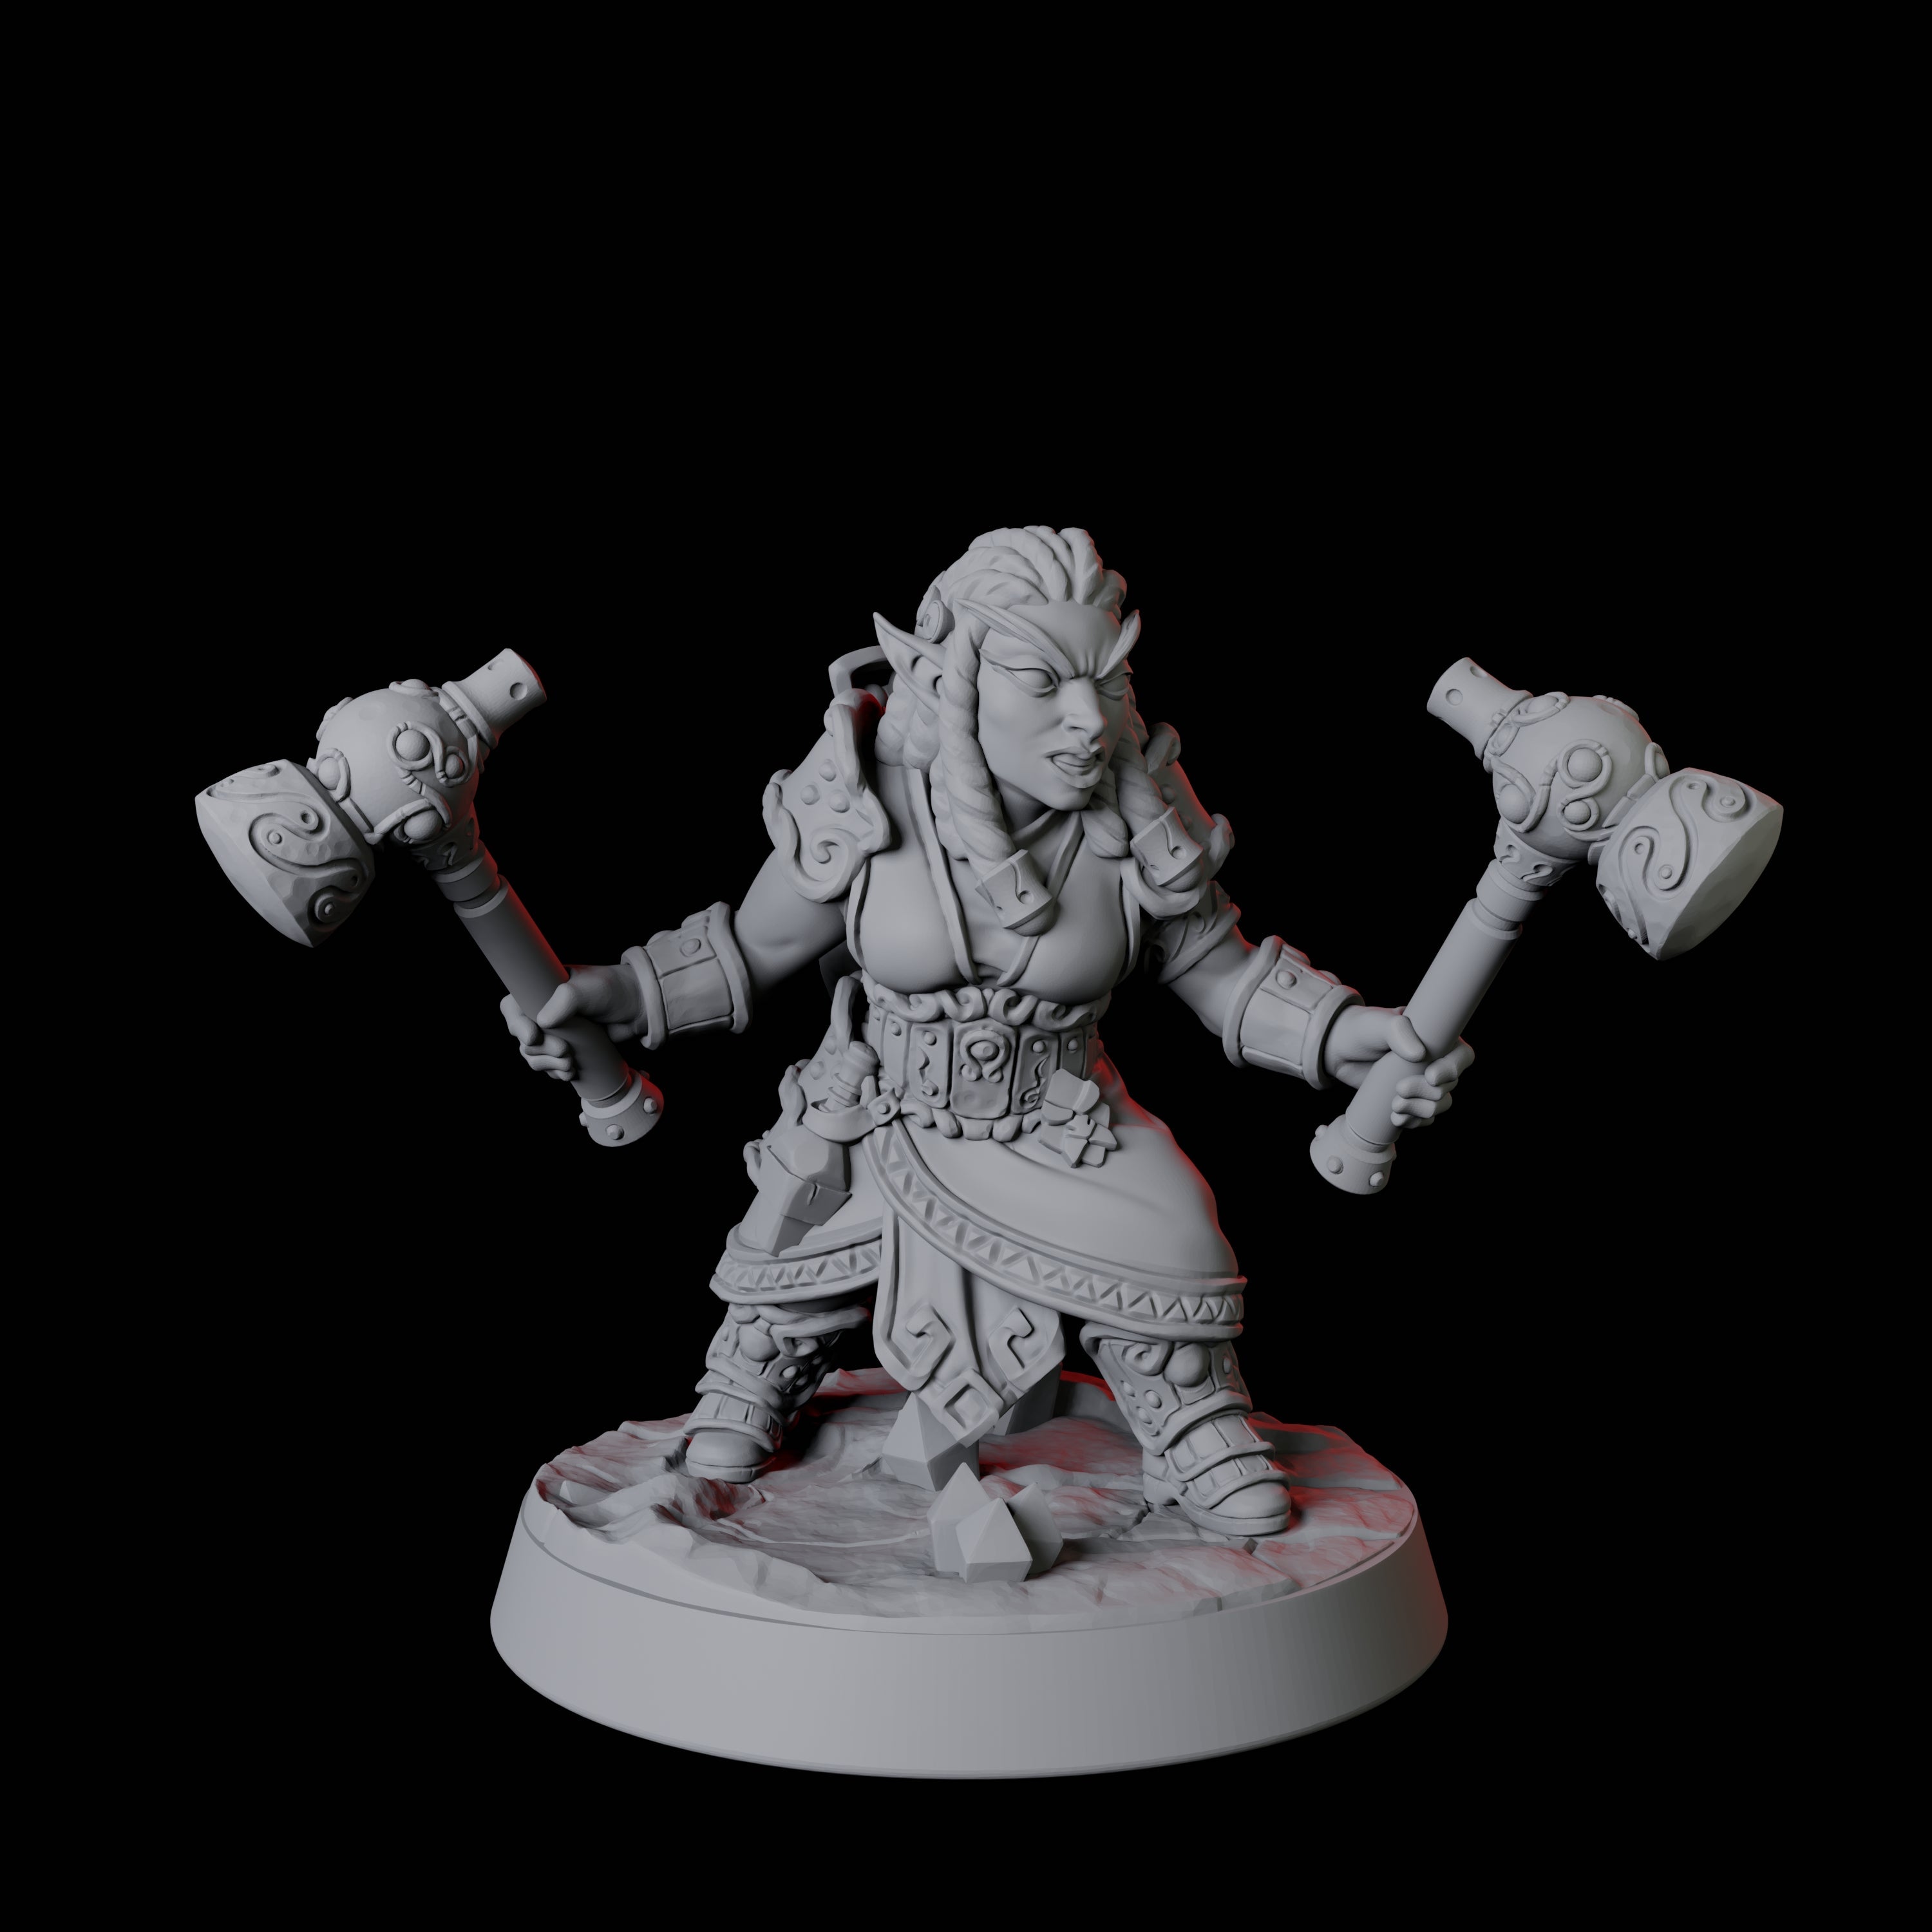 Gnome Miner F Miniature for Dungeons and Dragons, Pathfinder or other TTRPGs